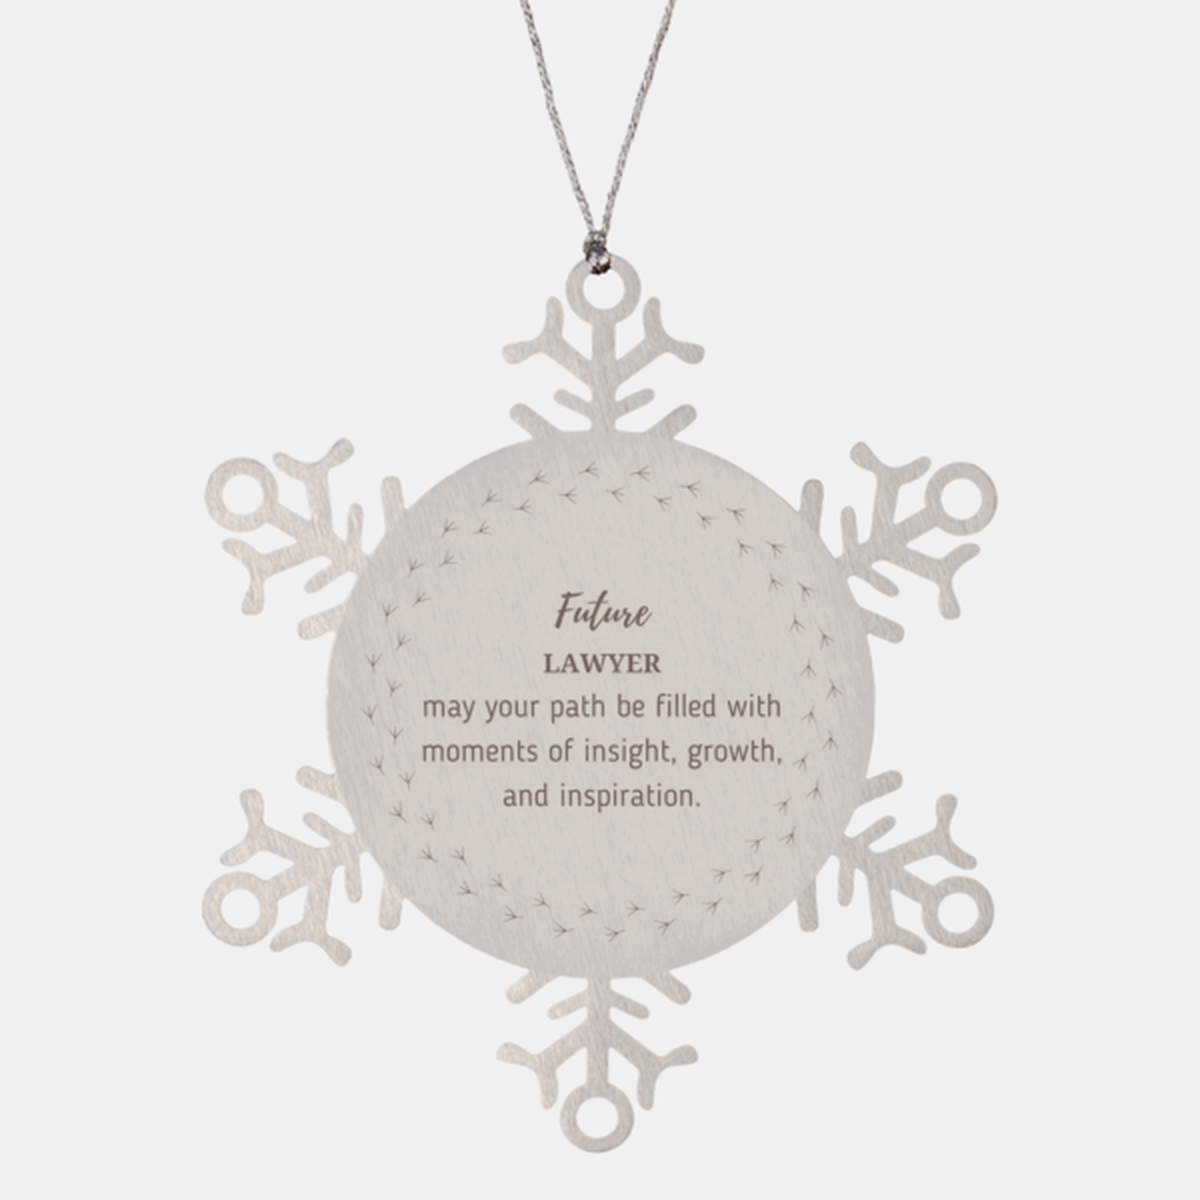 Future Lawyer Gifts, May your path be filled with moments of insight, Graduation Gifts for New Lawyer, Christmas Unique Snowflake Ornament For Men, Women, Friends